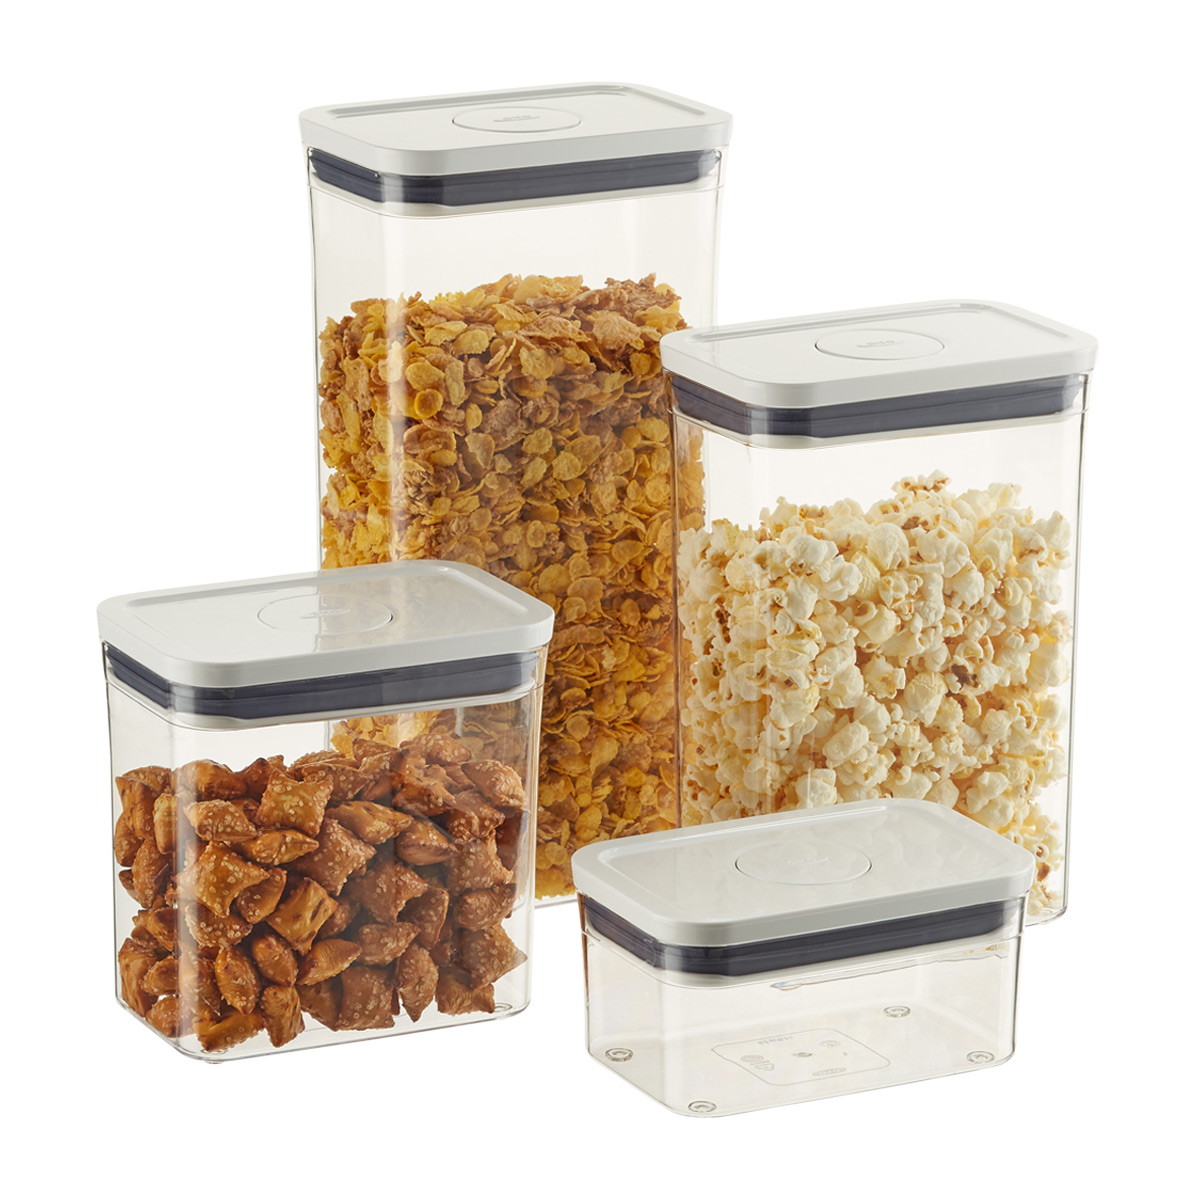 https://www.containerstore.com/catalogimages/368397/10075134g.jpg